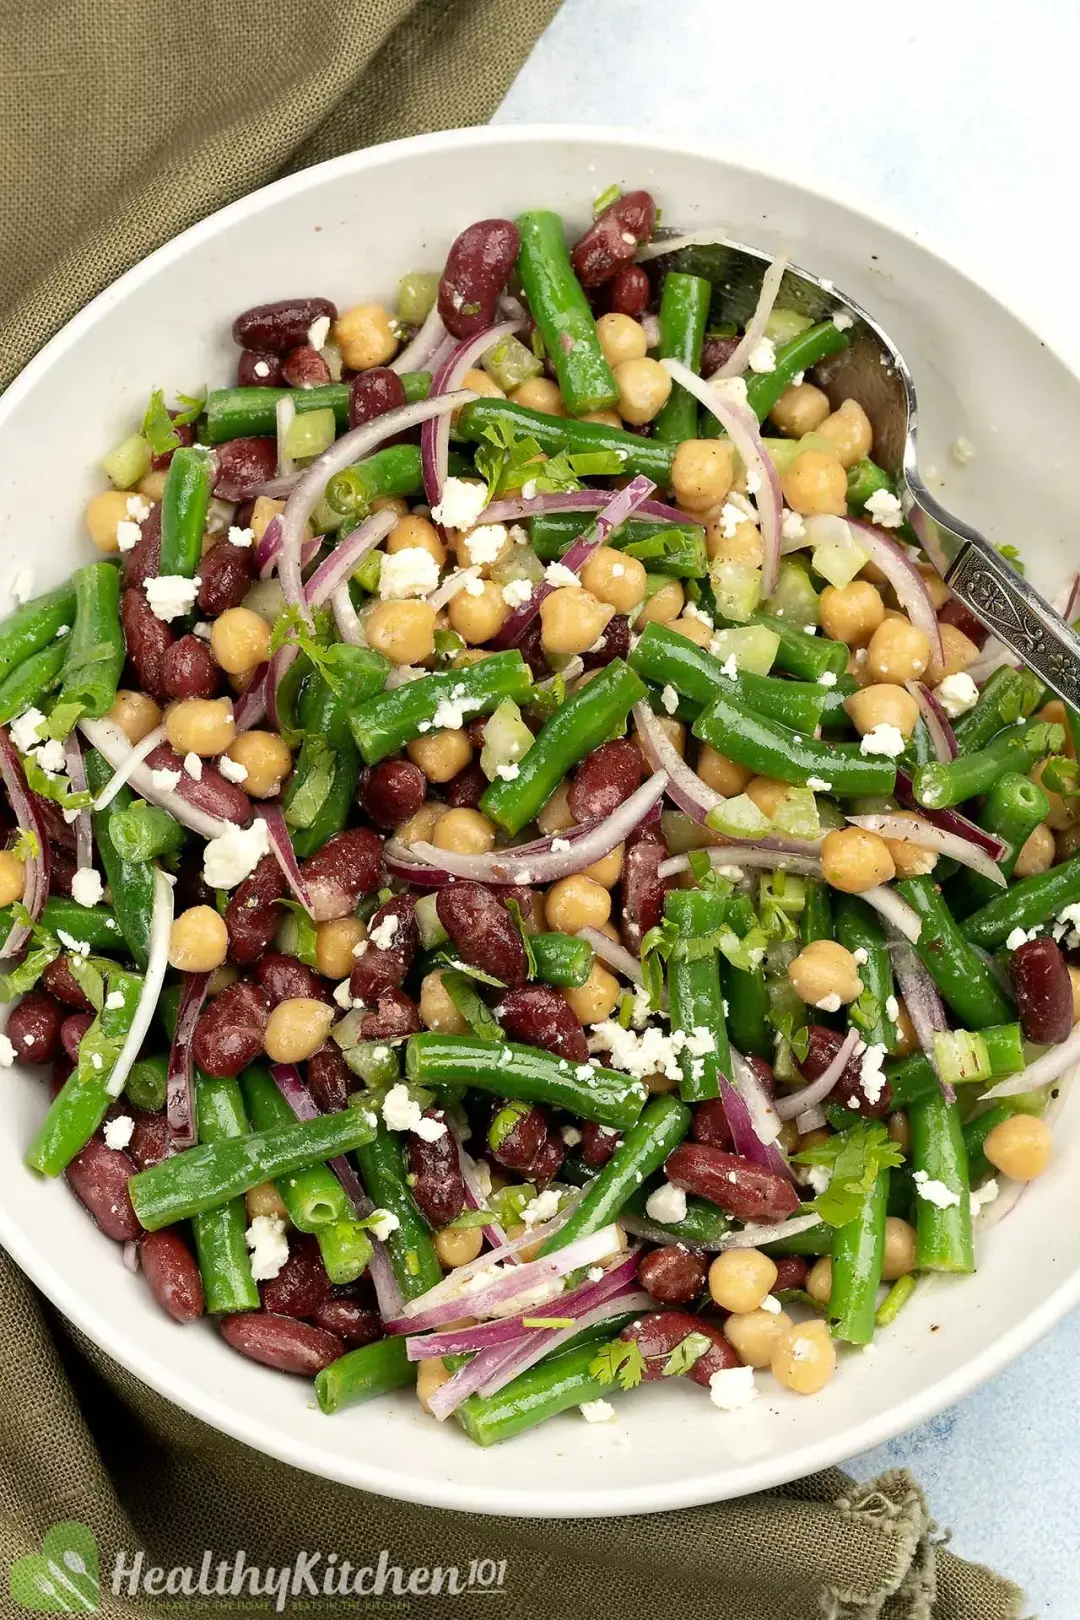 Three-bean salad on a plate with green beans, chickpeas, kidney beans, and other herbs